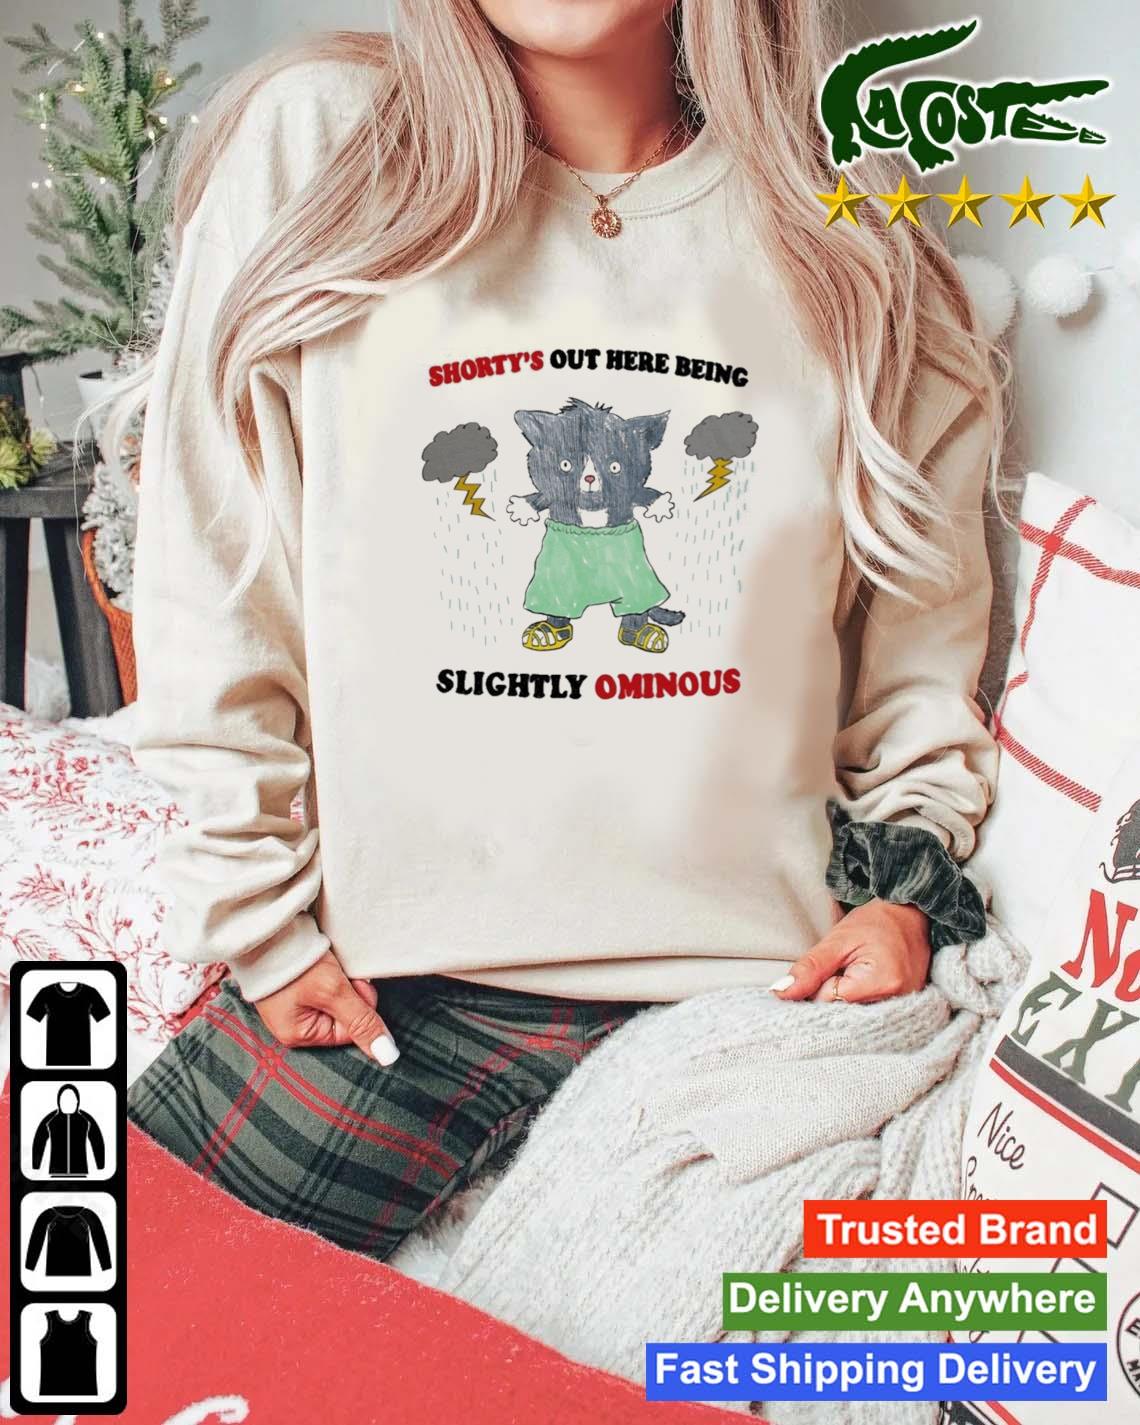 Shorty's Out Here Being Slightly Ominous Sweats Mockup Sweater